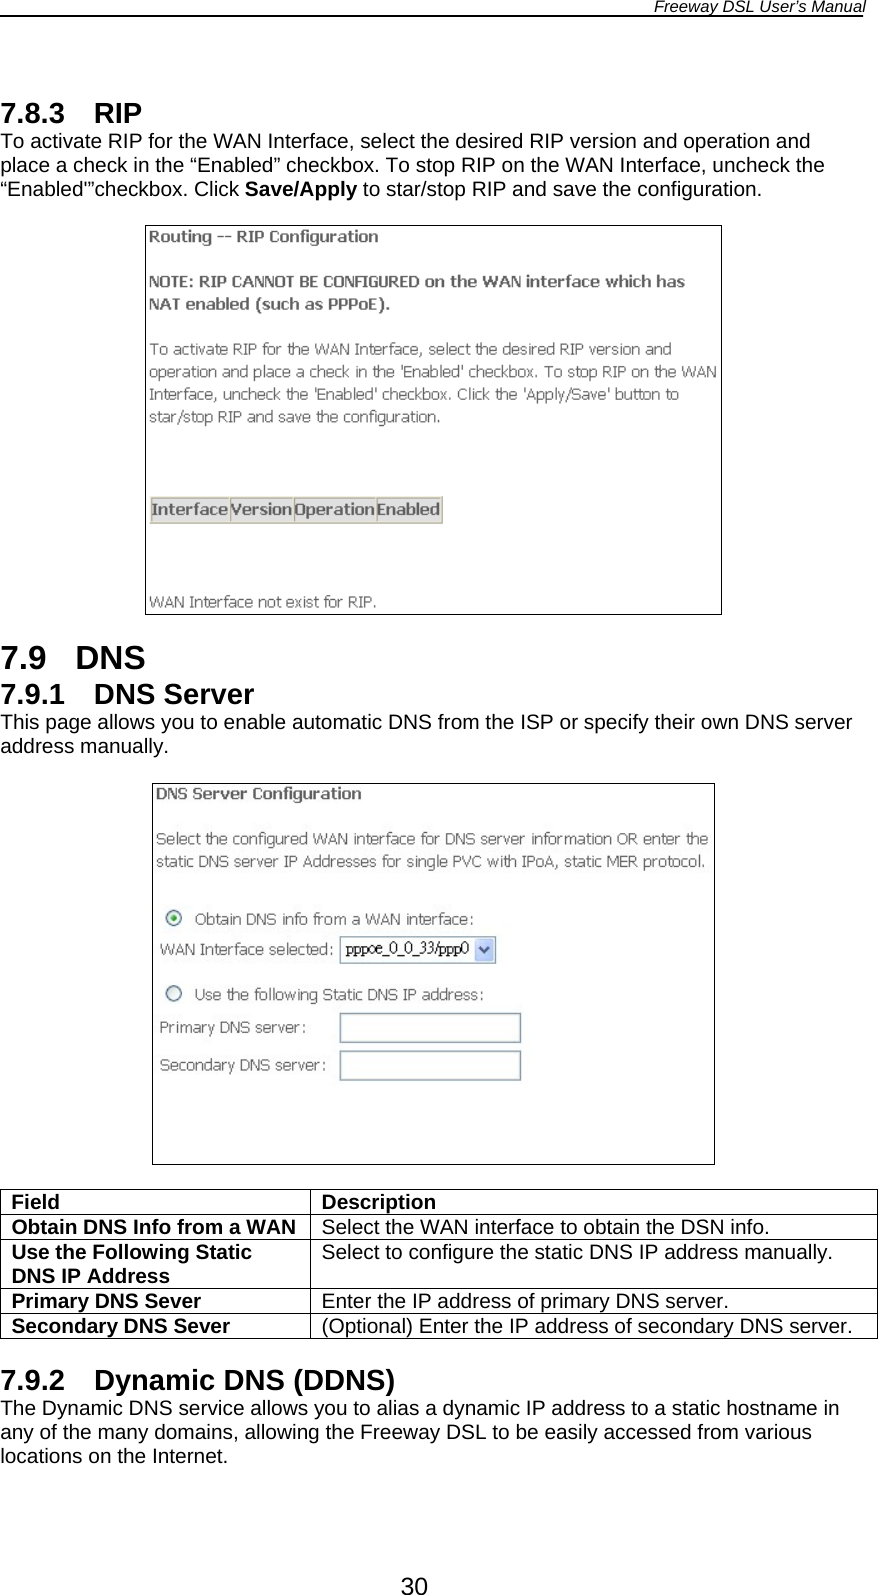 Freeway DSL User’s Manual  30  7.8.3 RIP To activate RIP for the WAN Interface, select the desired RIP version and operation and place a check in the “Enabled” checkbox. To stop RIP on the WAN Interface, uncheck the “Enabled&apos;”checkbox. Click Save/Apply to star/stop RIP and save the configuration.    7.9 DNS 7.9.1 DNS Server This page allows you to enable automatic DNS from the ISP or specify their own DNS server address manually.    Field Description Obtain DNS Info from a WAN  Select the WAN interface to obtain the DSN info. Use the Following Static DNS IP Address  Select to configure the static DNS IP address manually. Primary DNS Sever  Enter the IP address of primary DNS server. Secondary DNS Sever  (Optional) Enter the IP address of secondary DNS server.  7.9.2  Dynamic DNS (DDNS) The Dynamic DNS service allows you to alias a dynamic IP address to a static hostname in any of the many domains, allowing the Freeway DSL to be easily accessed from various locations on the Internet.  